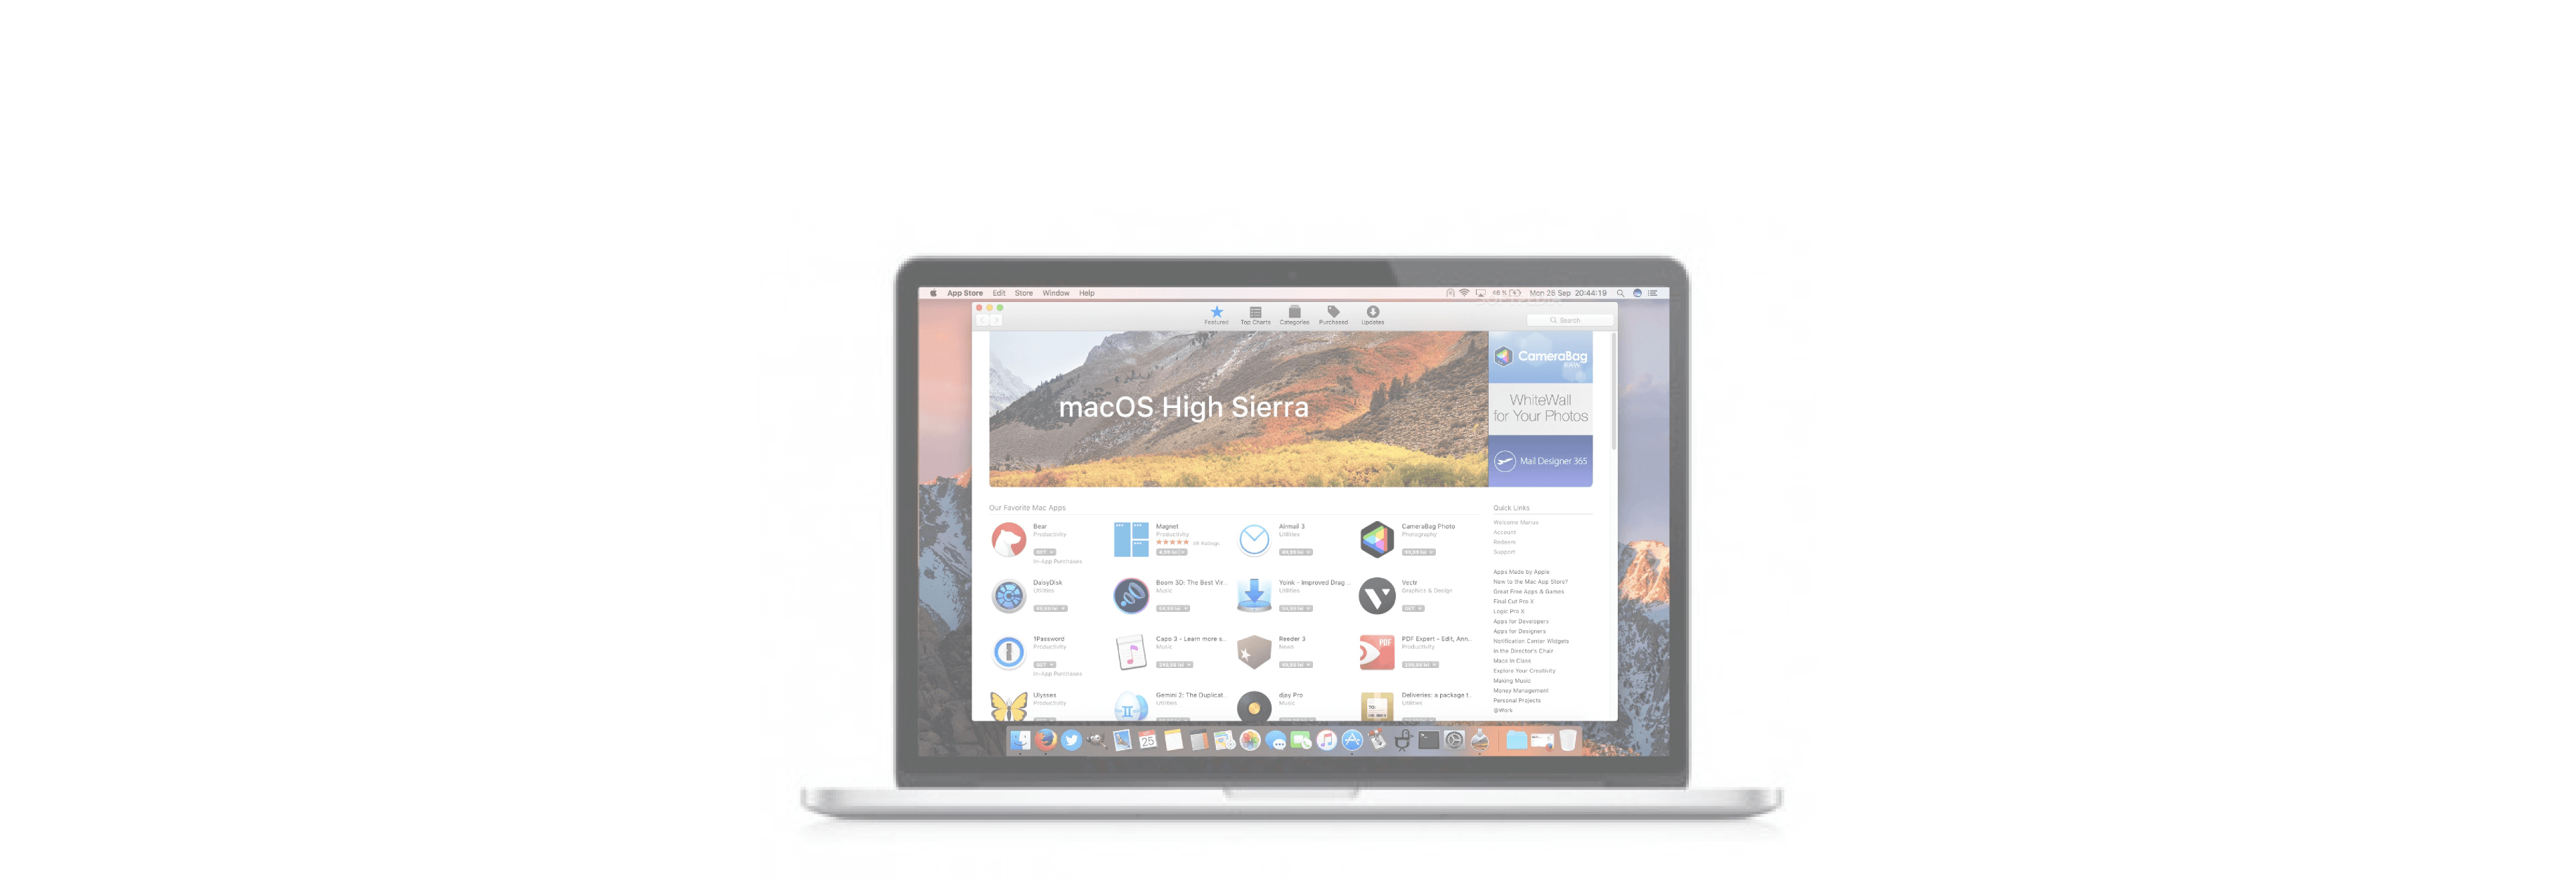 How to check for app updates in the Mac App Store